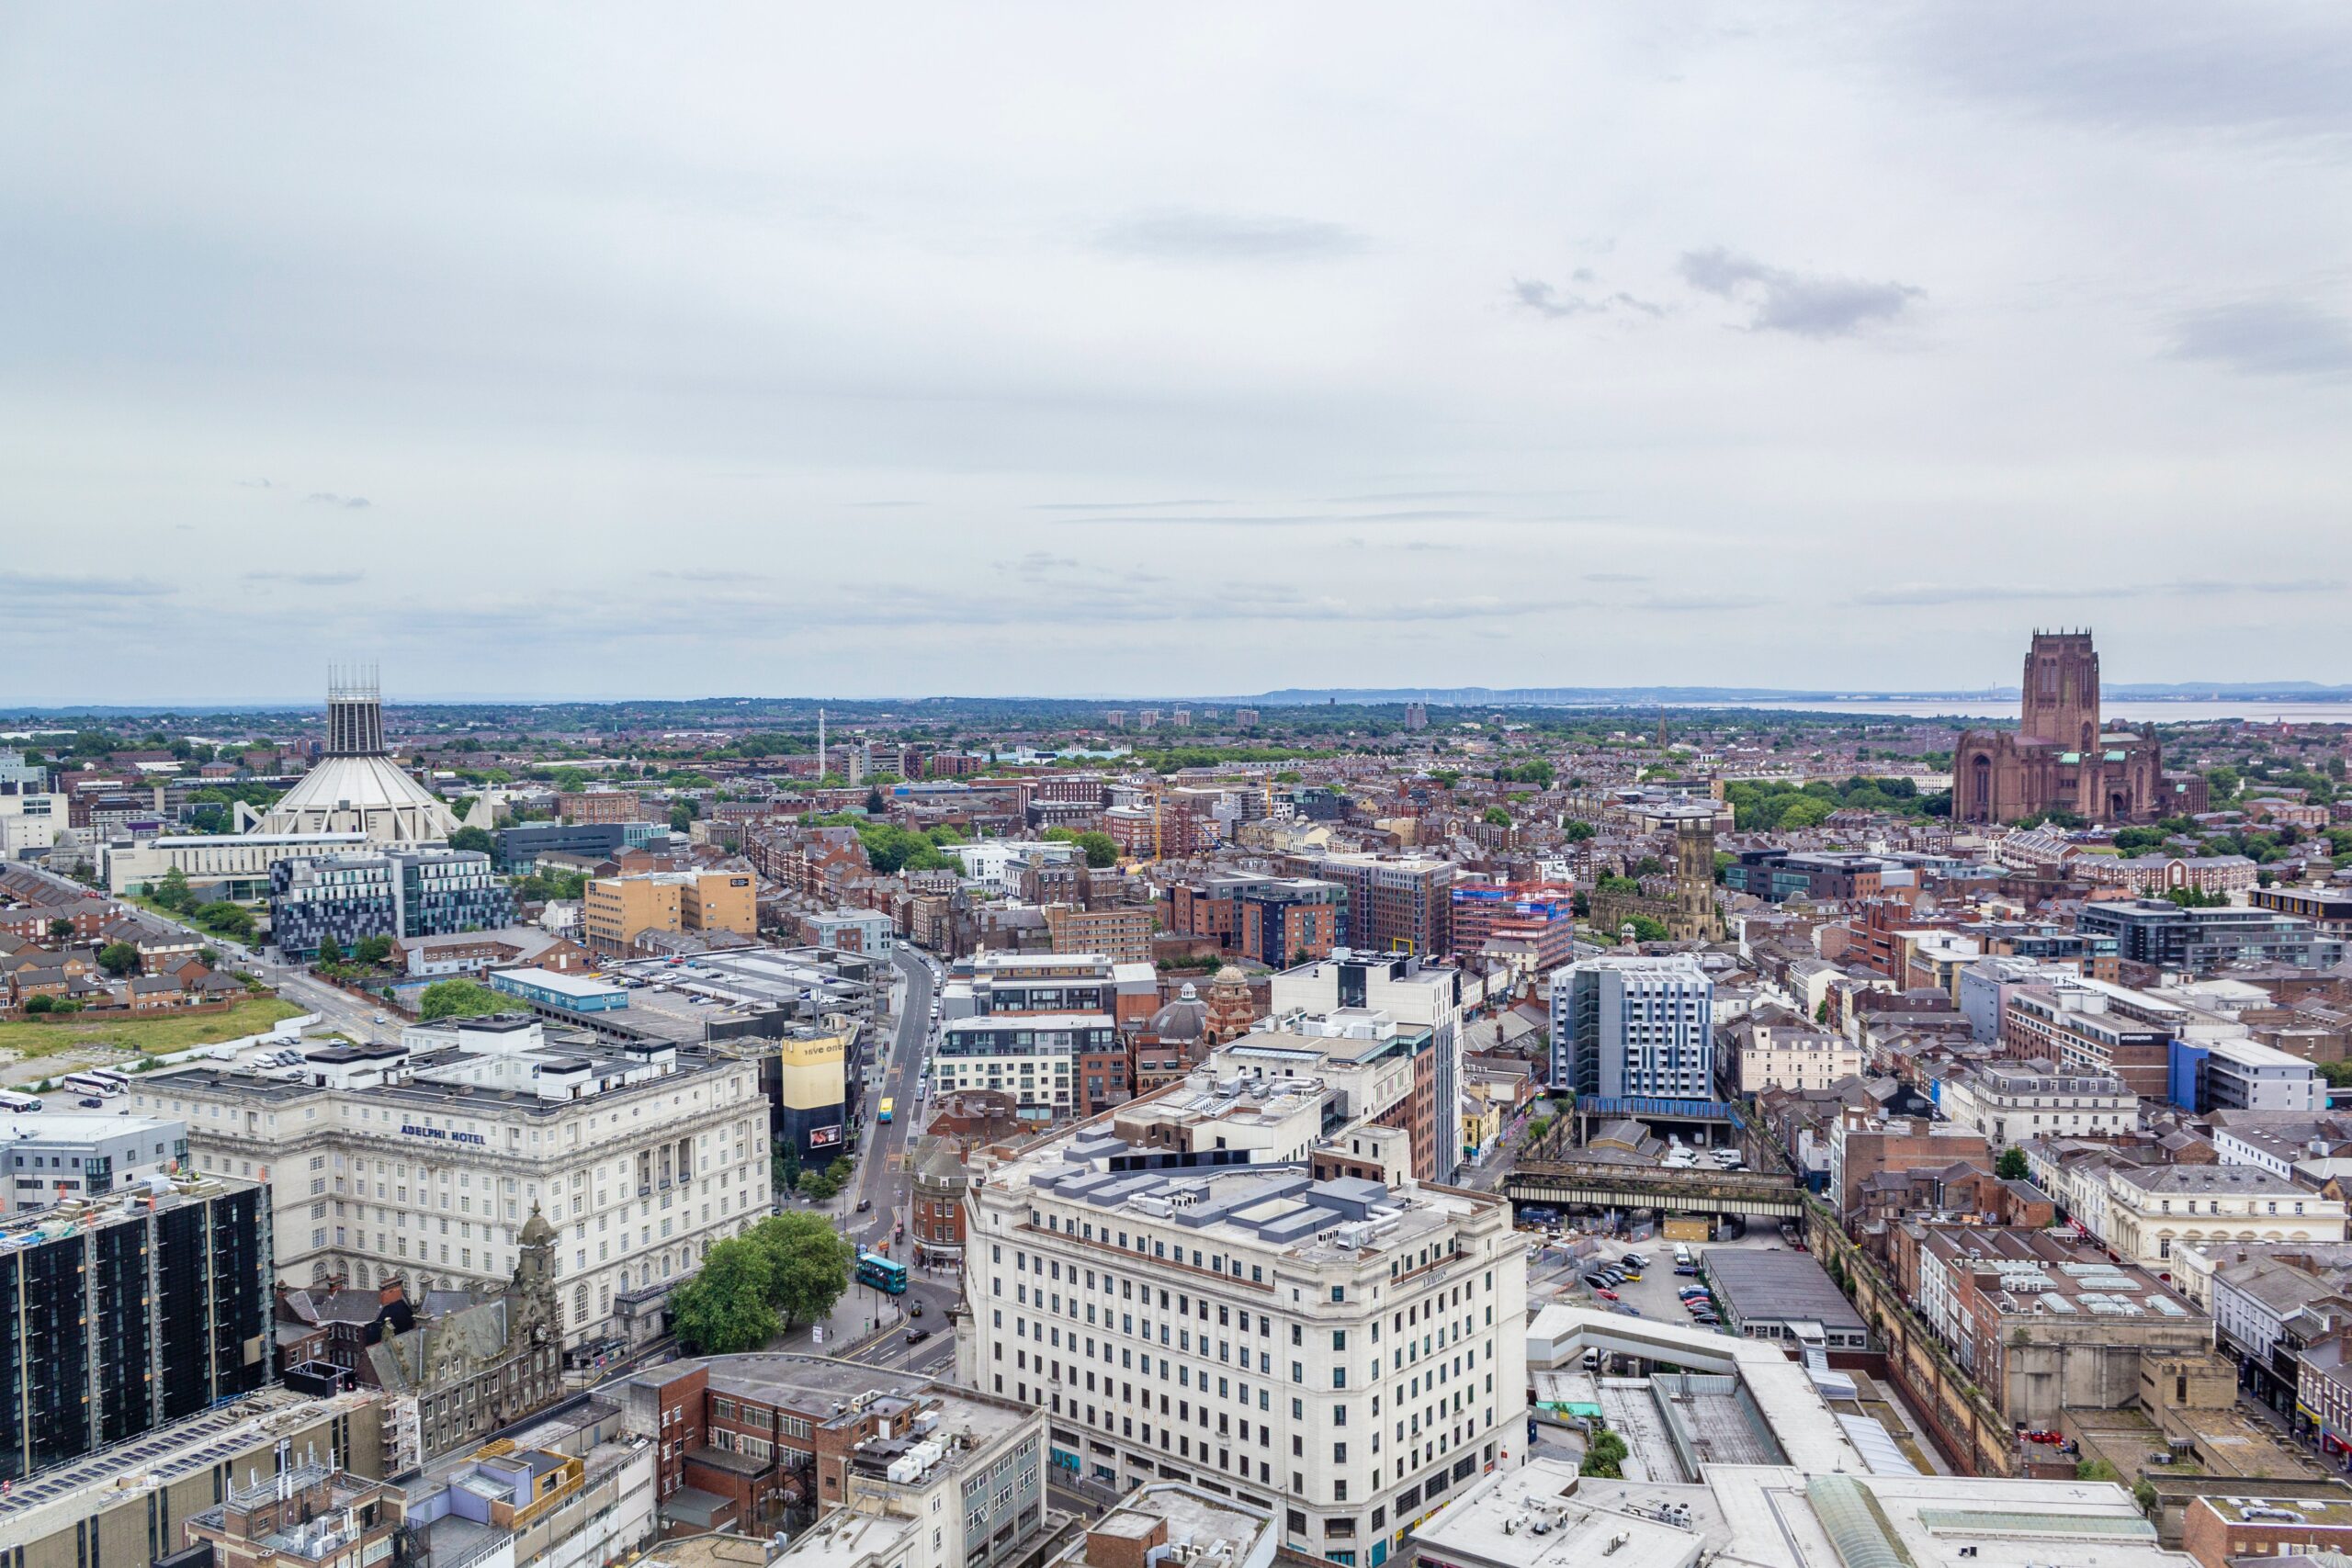 Liverpool skyline from above.